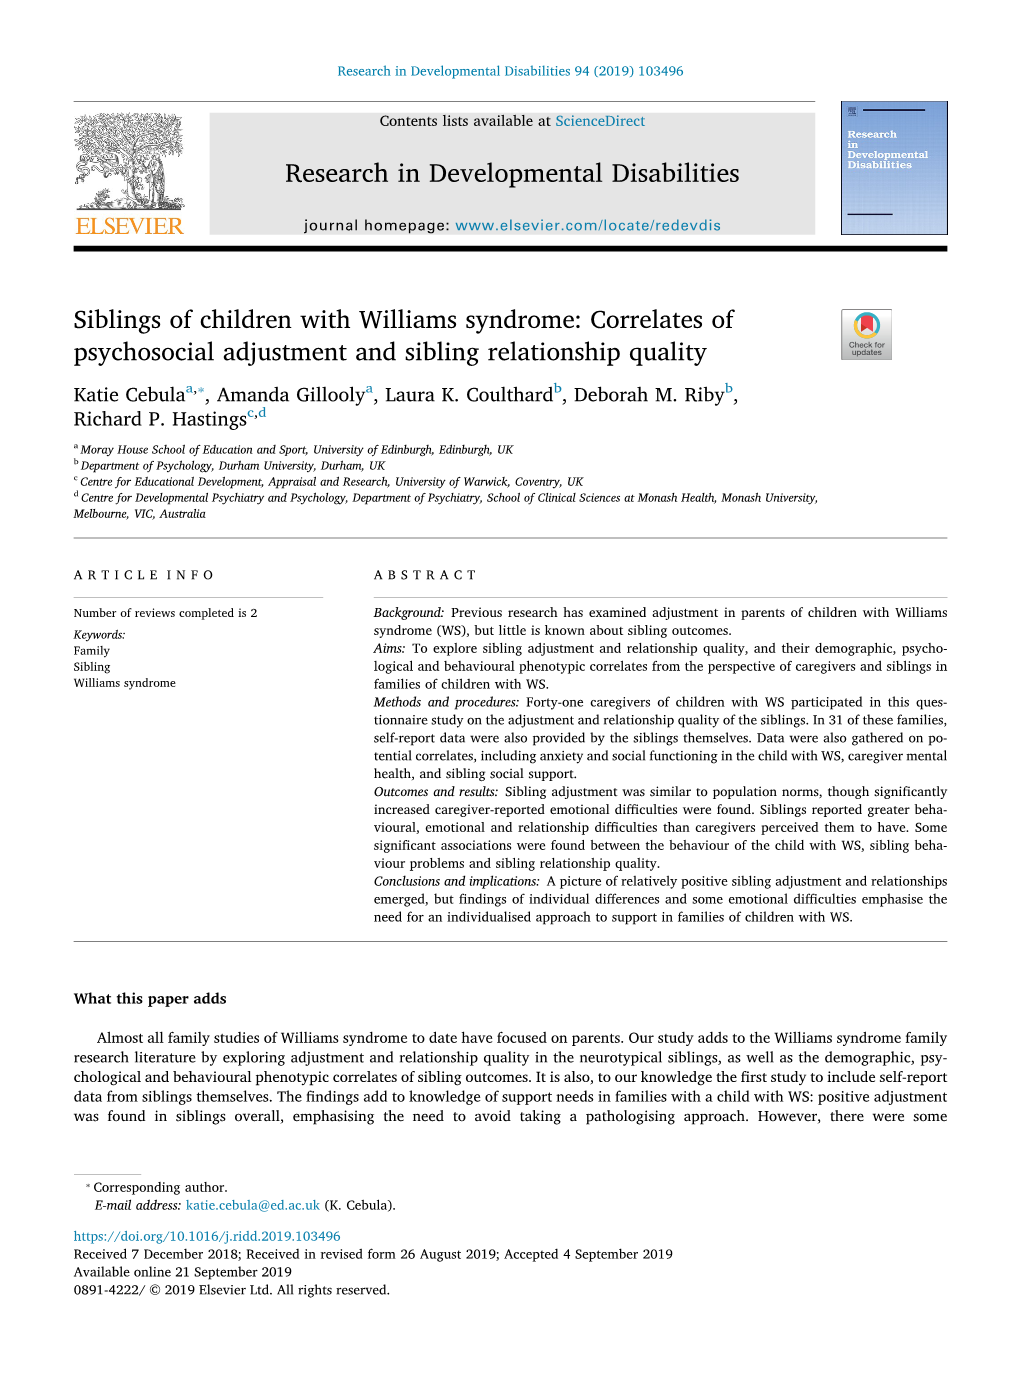 Siblings of Children with Williams Syndrome Correlates of Psychosocial Adjustment and Sibling Relationship Quality